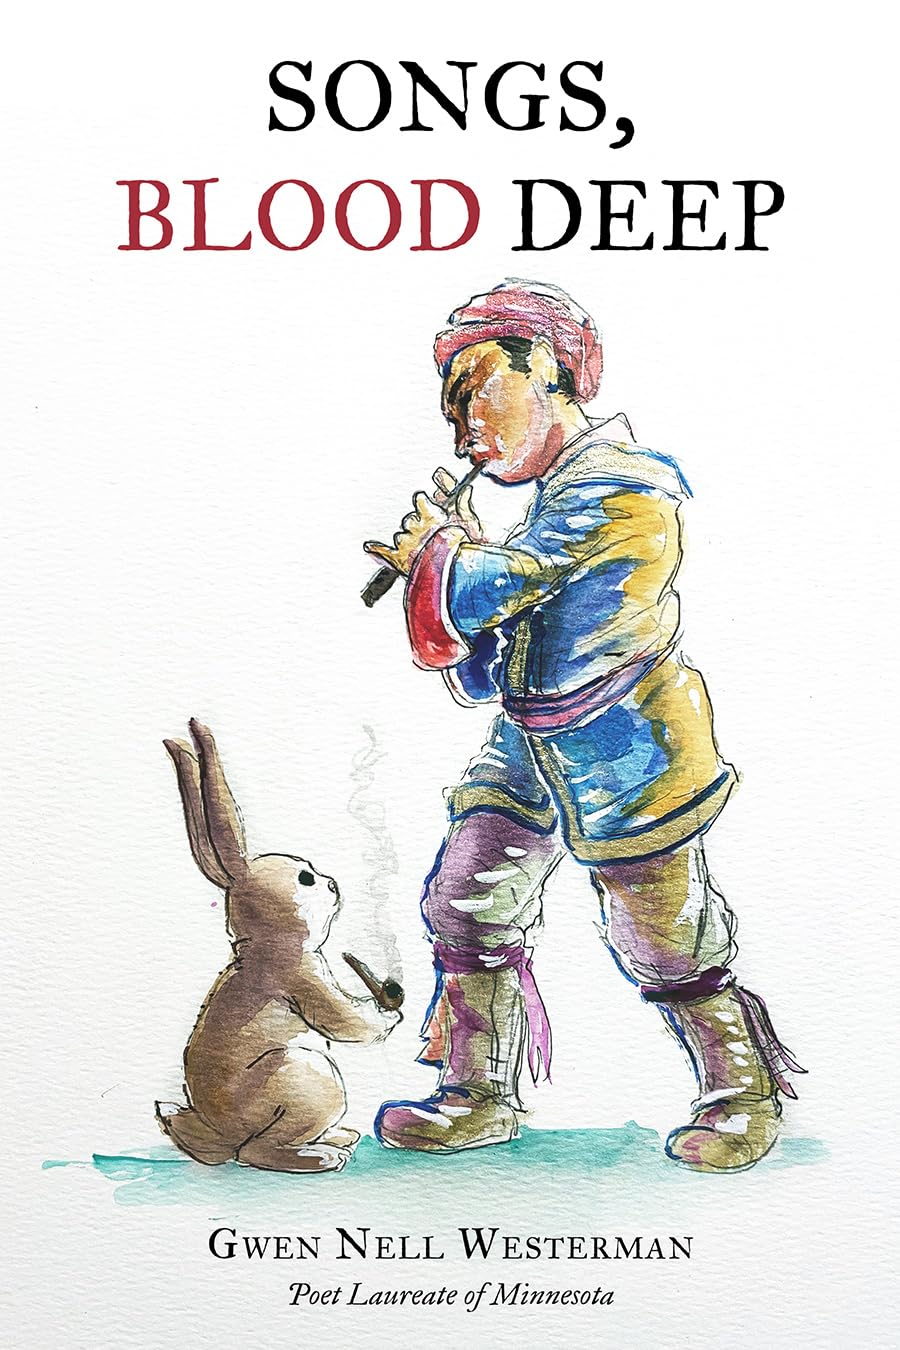 Songs, Blood Deep by Gwen Nell Westerman